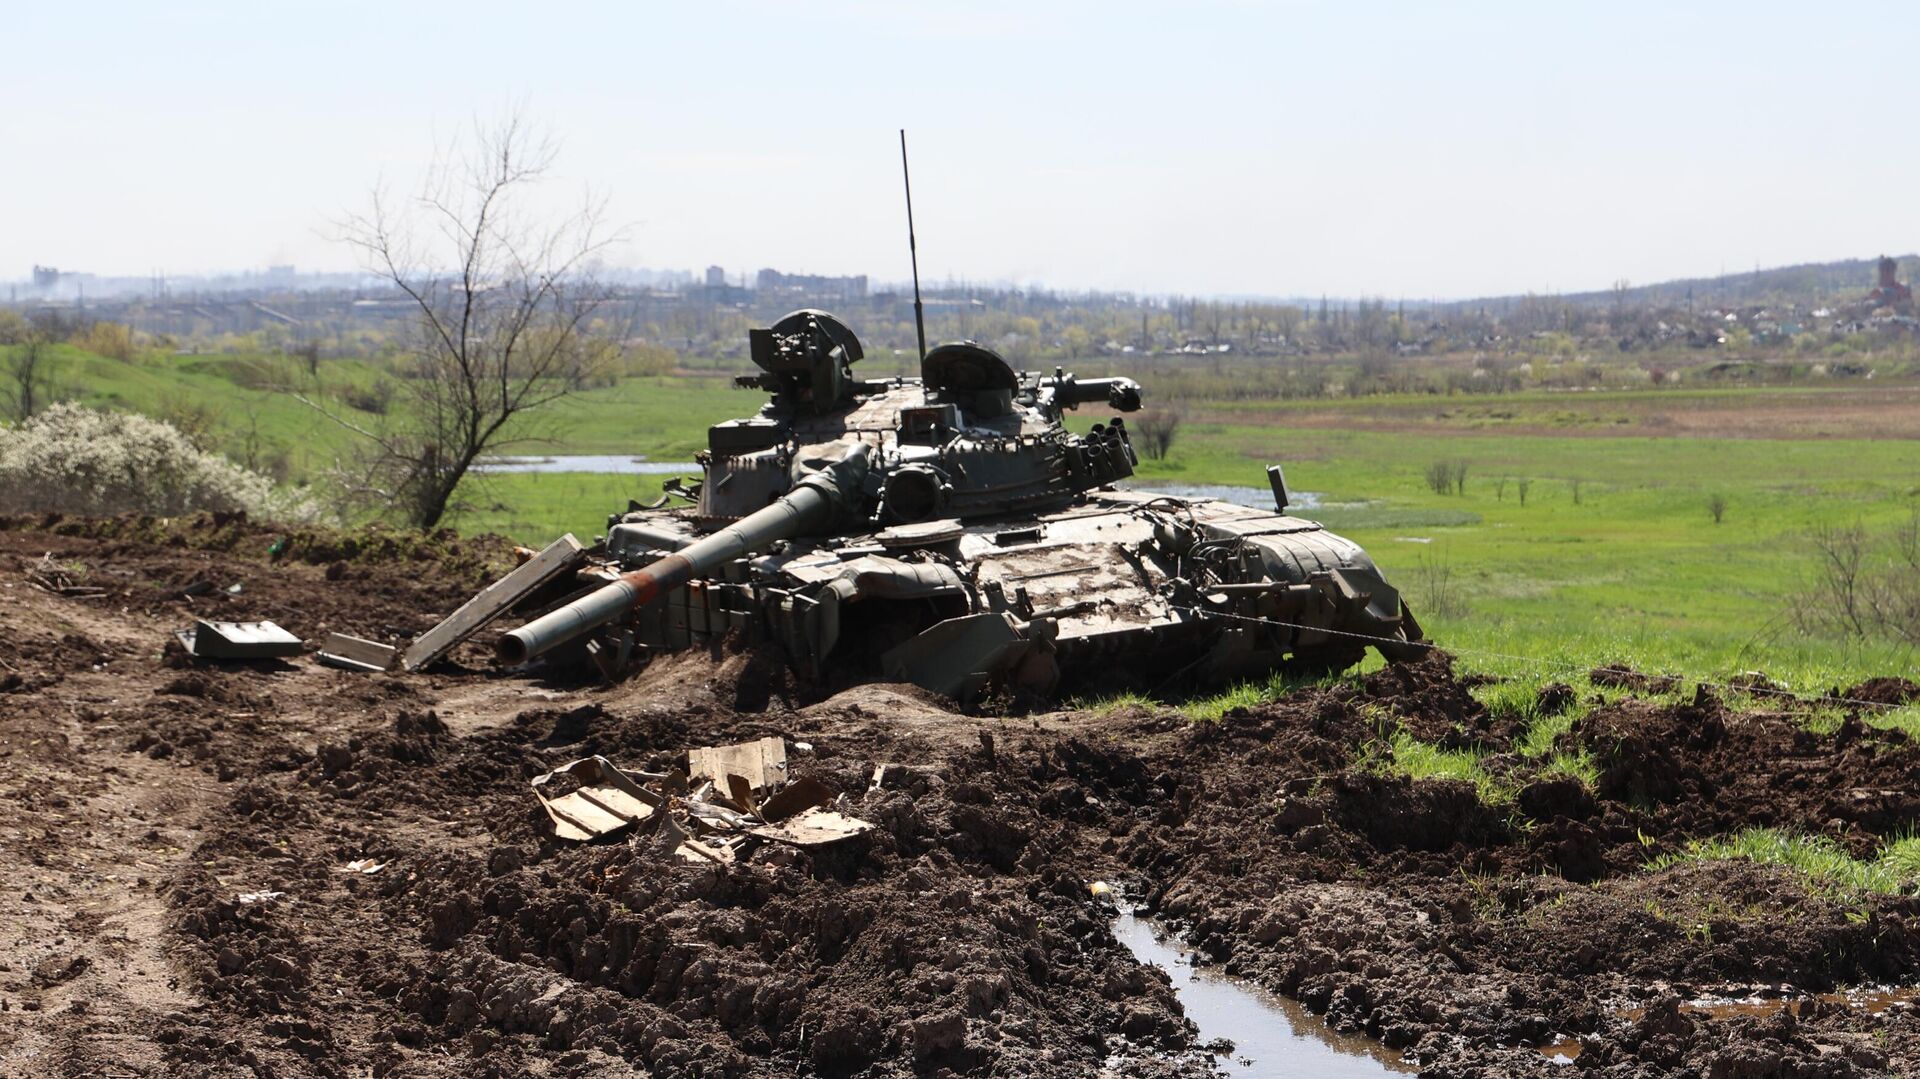 CNN: Ukraine’s allies watch with concern the situation on the battlefield